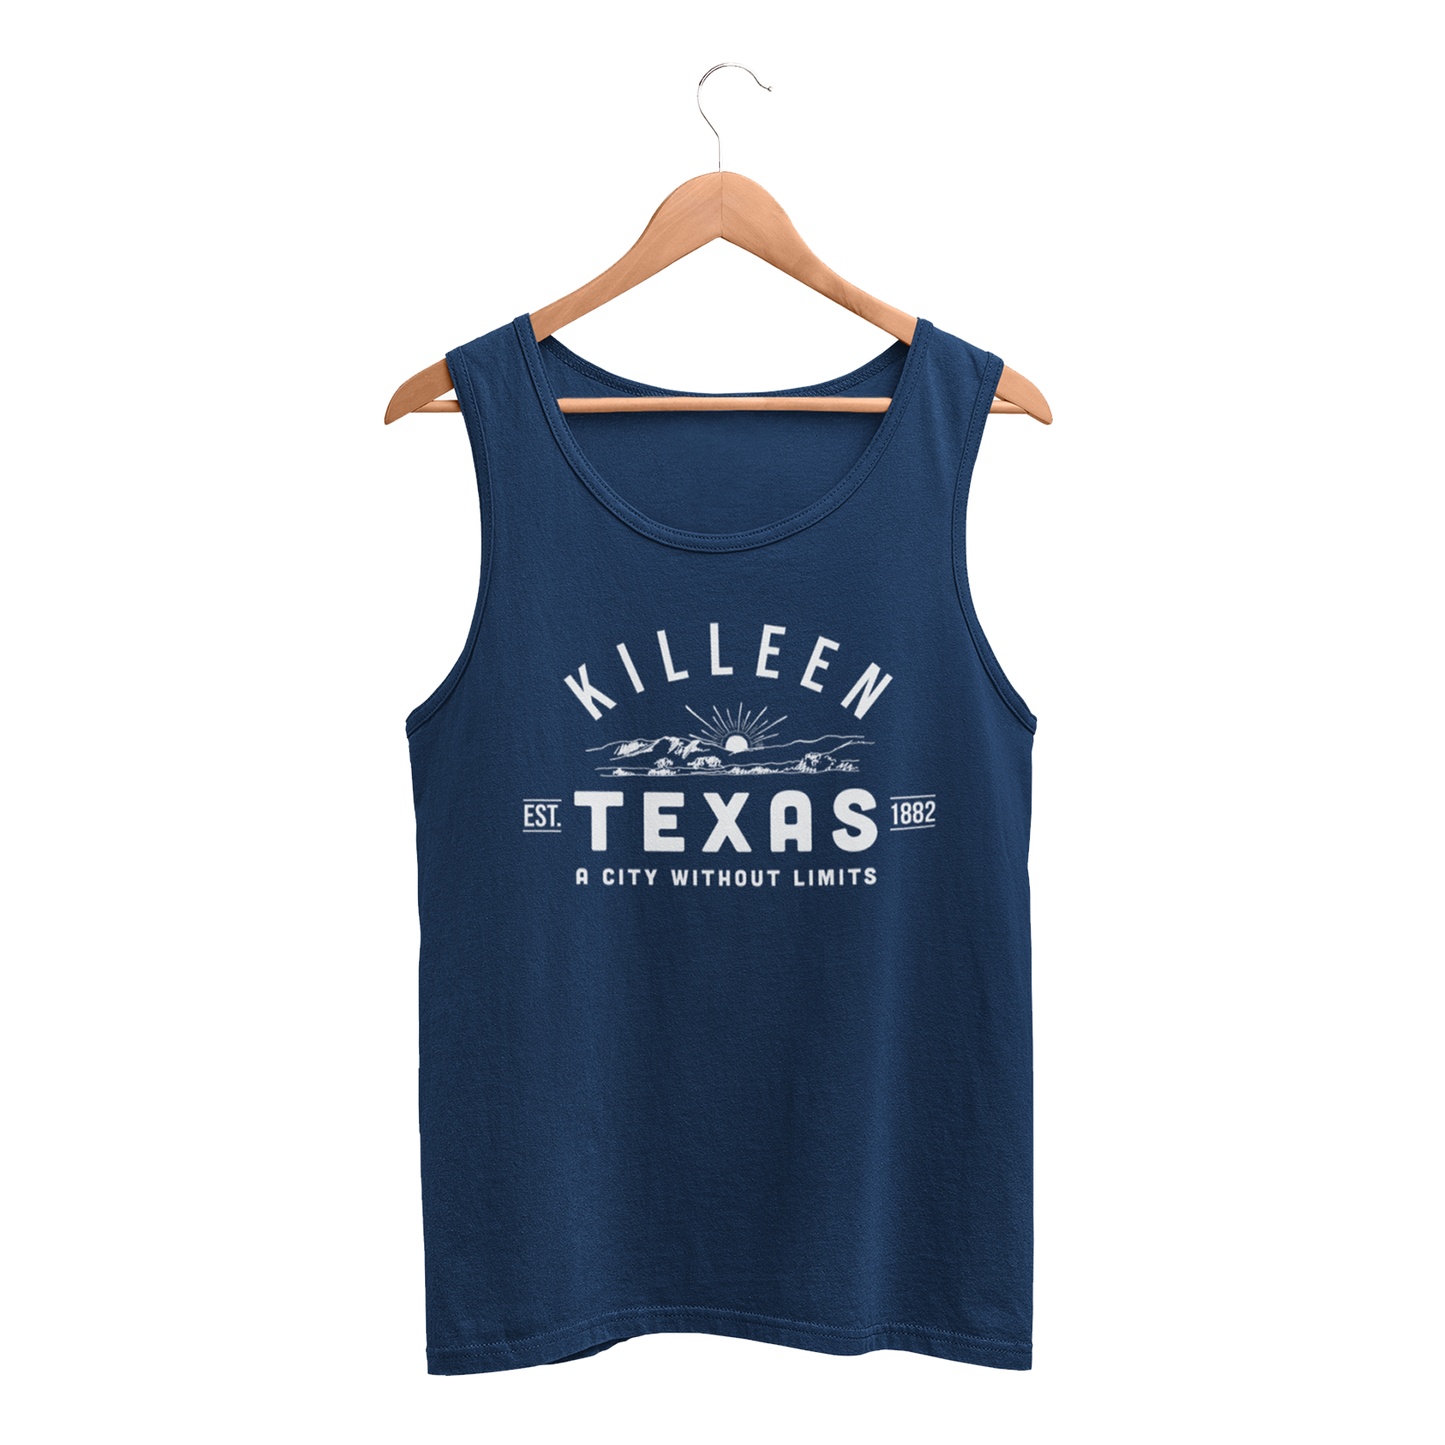 Killeen Texas Tank - Without Limits